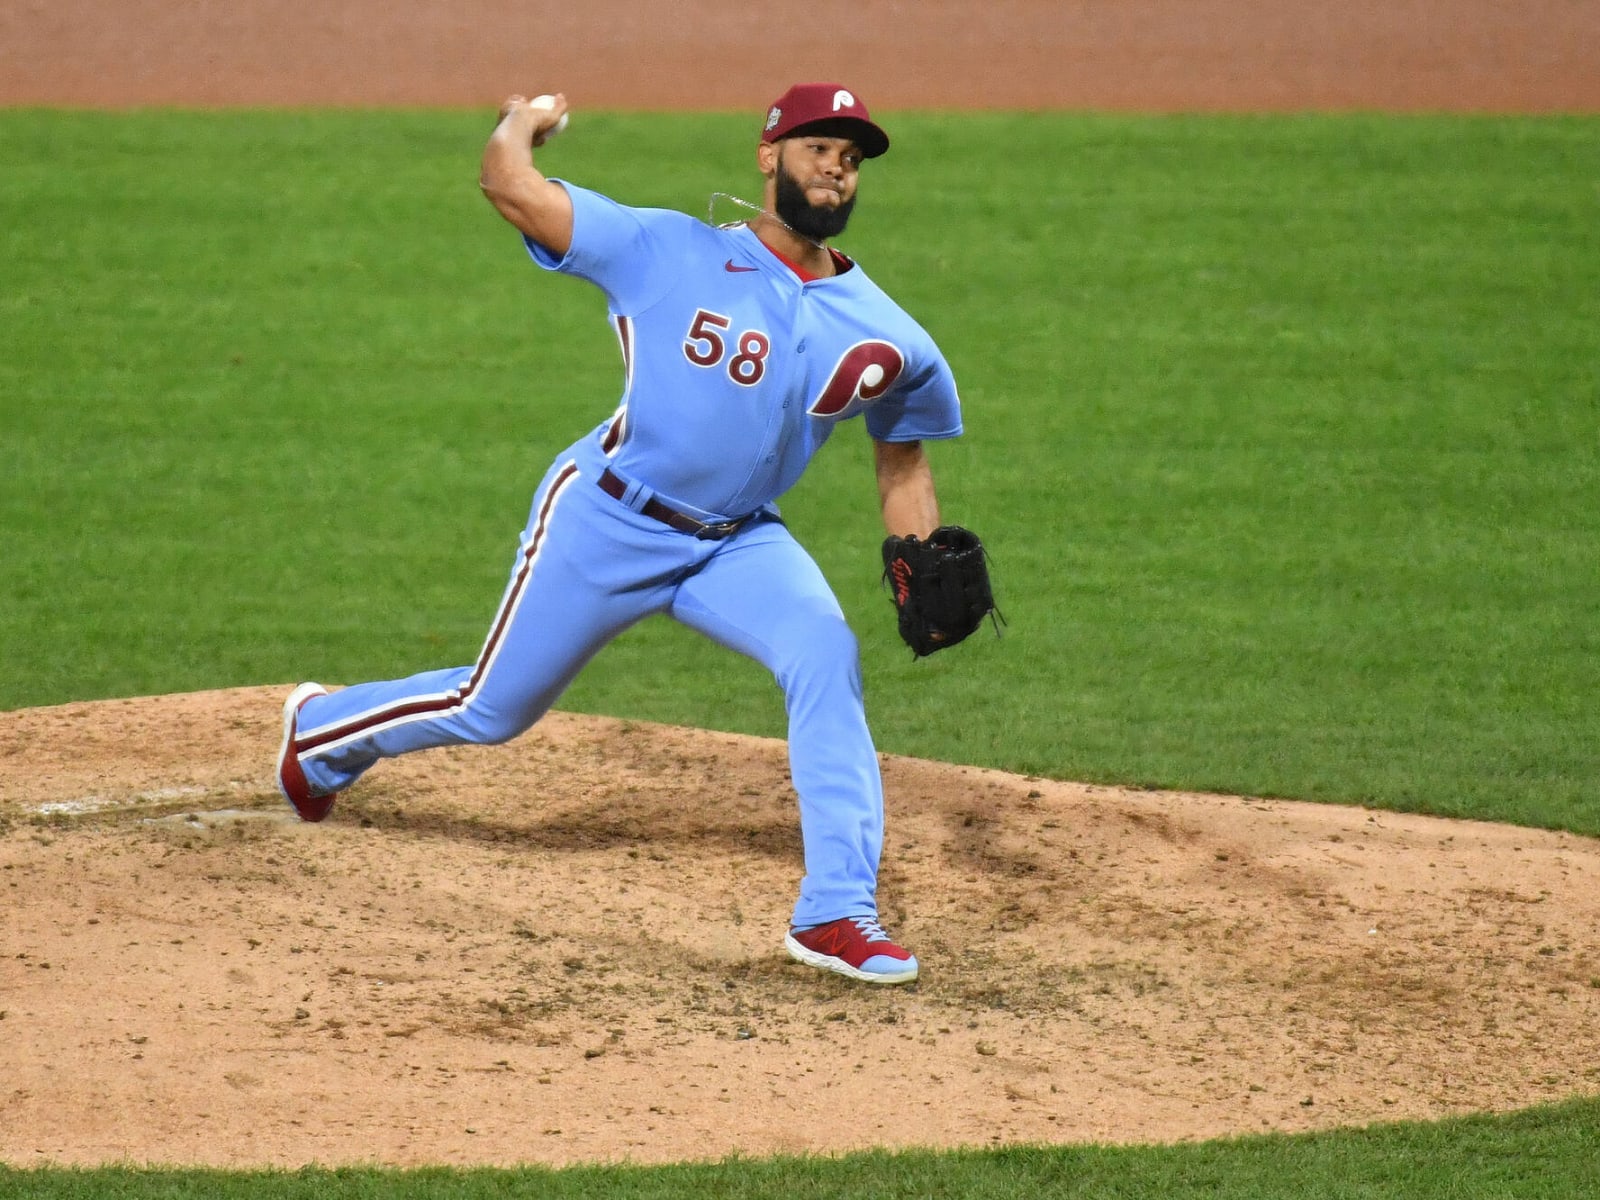 Report: Phillies reliever Seranthony Dominguez has UCL injury in